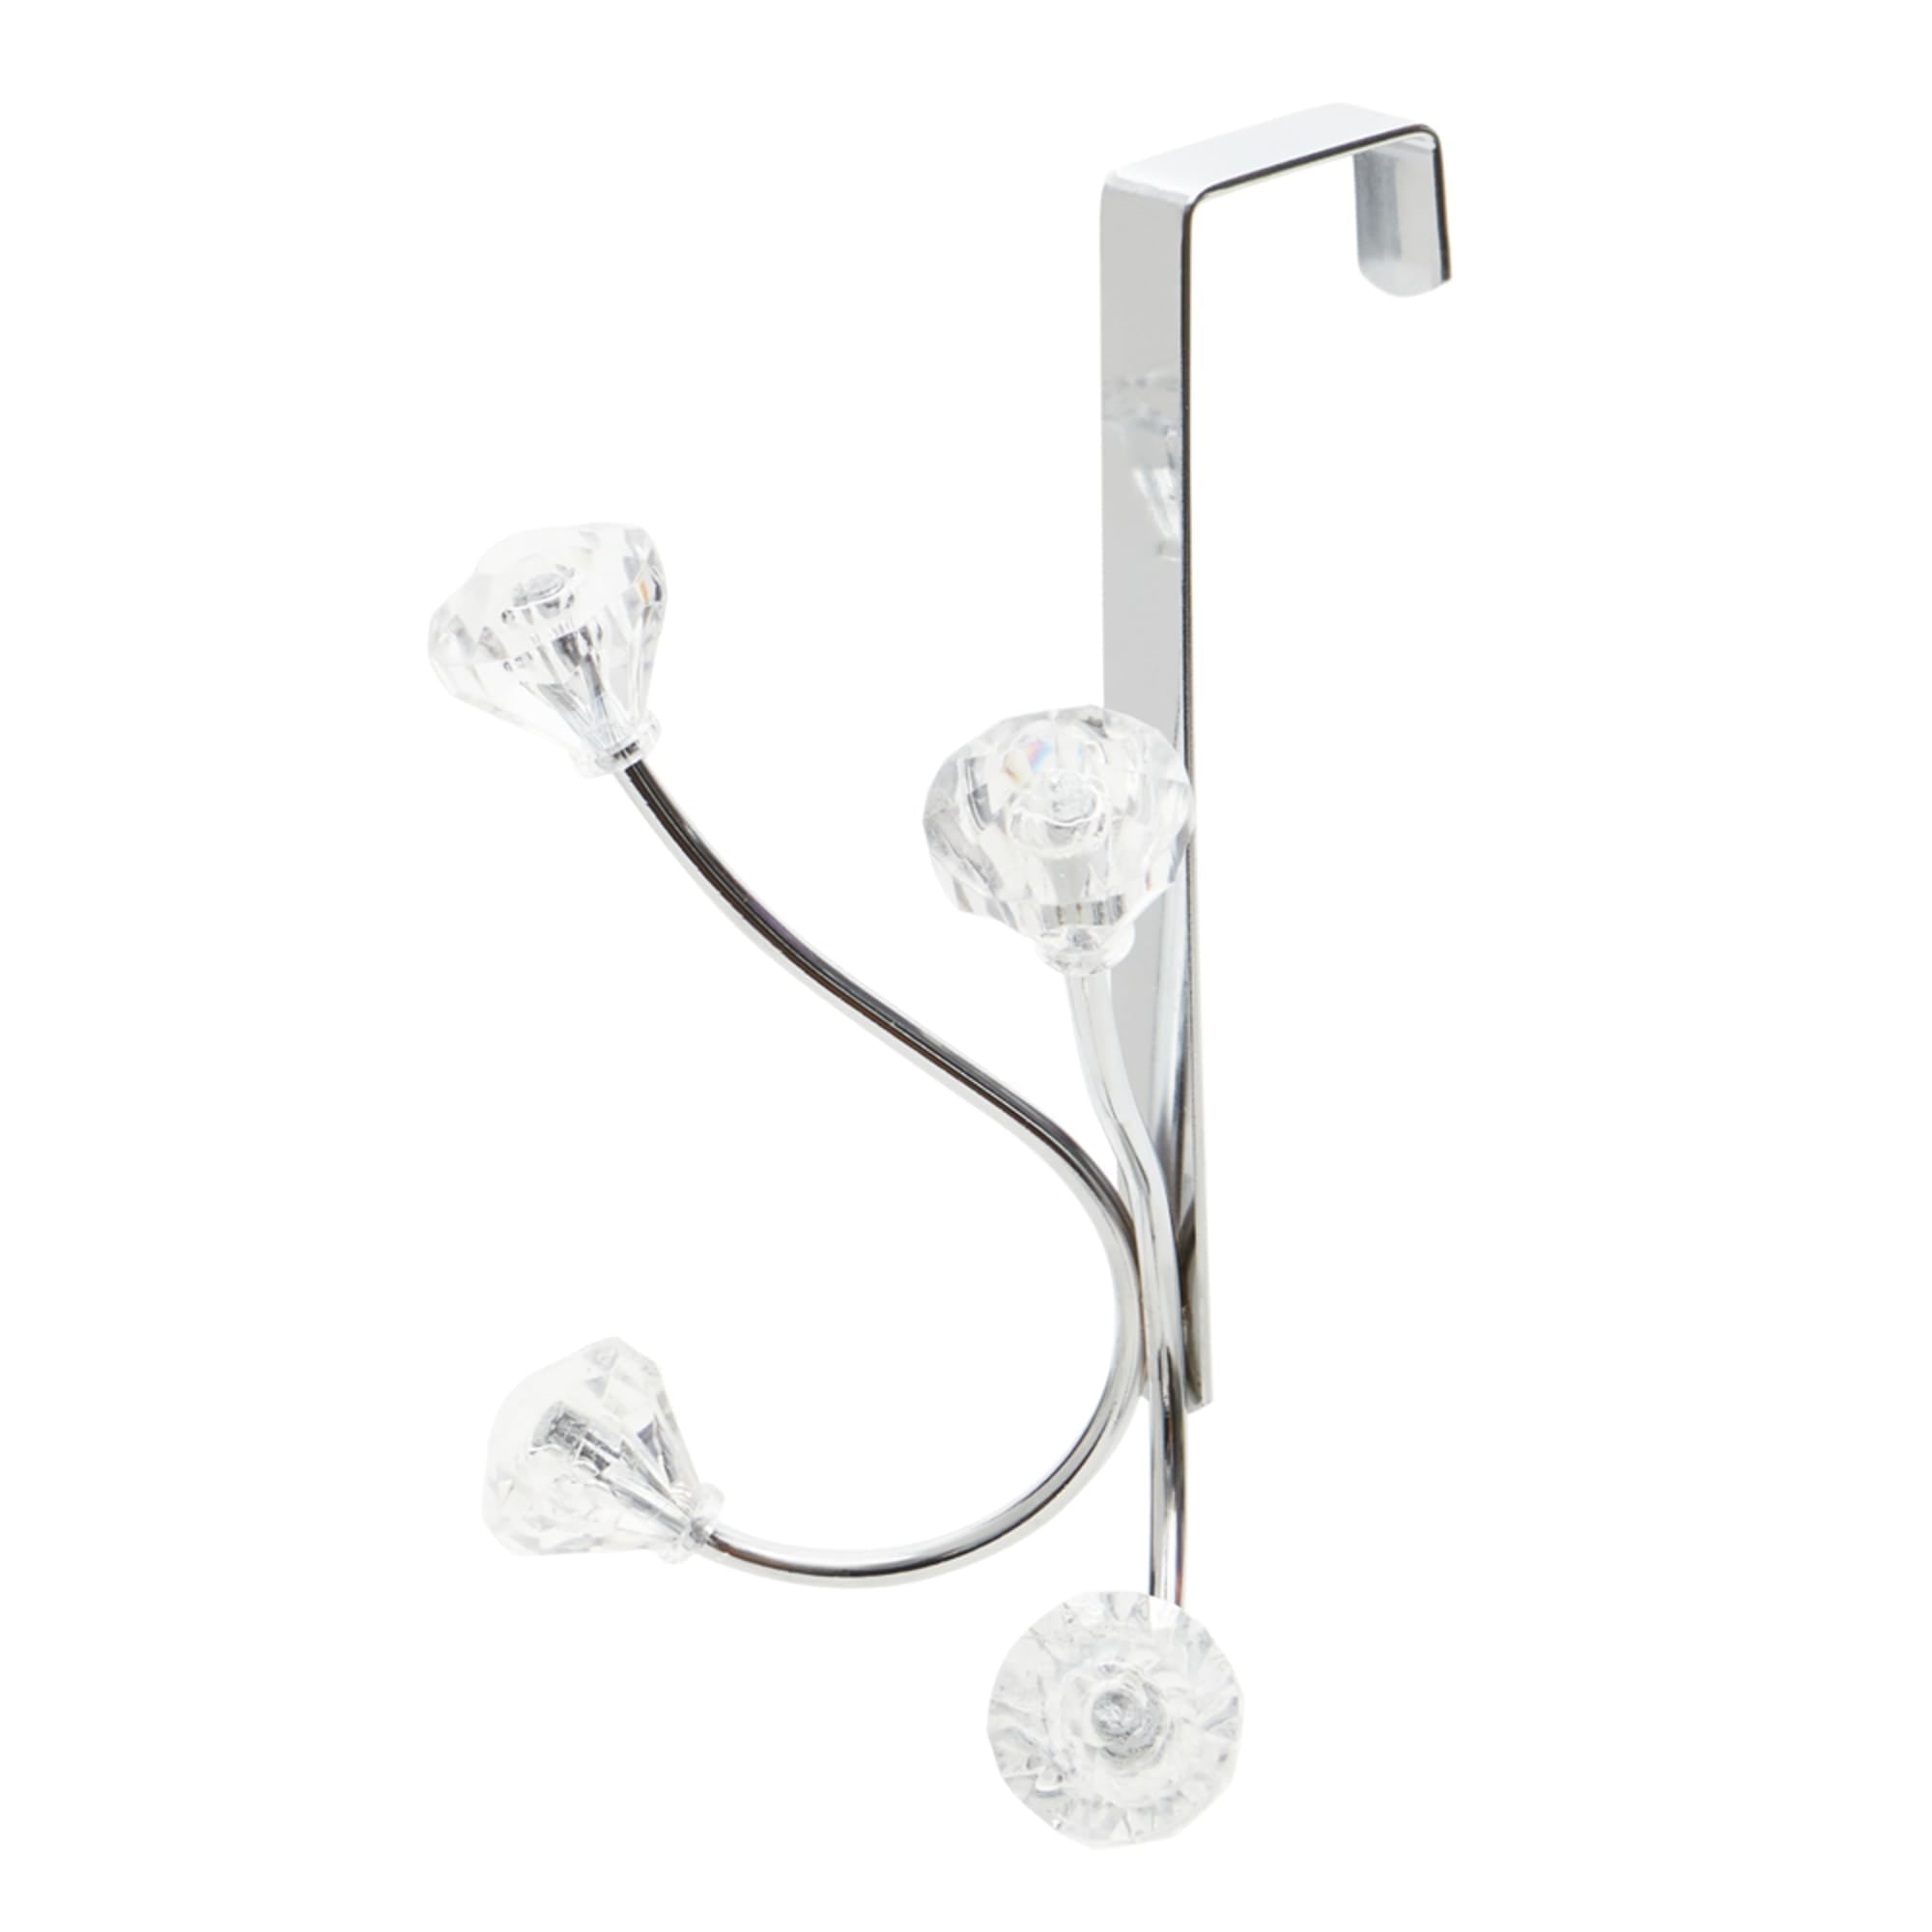 Home Basics Over the Door Double Hanging Hook with Crystal Knobs $3.00 EACH, CASE PACK OF 12